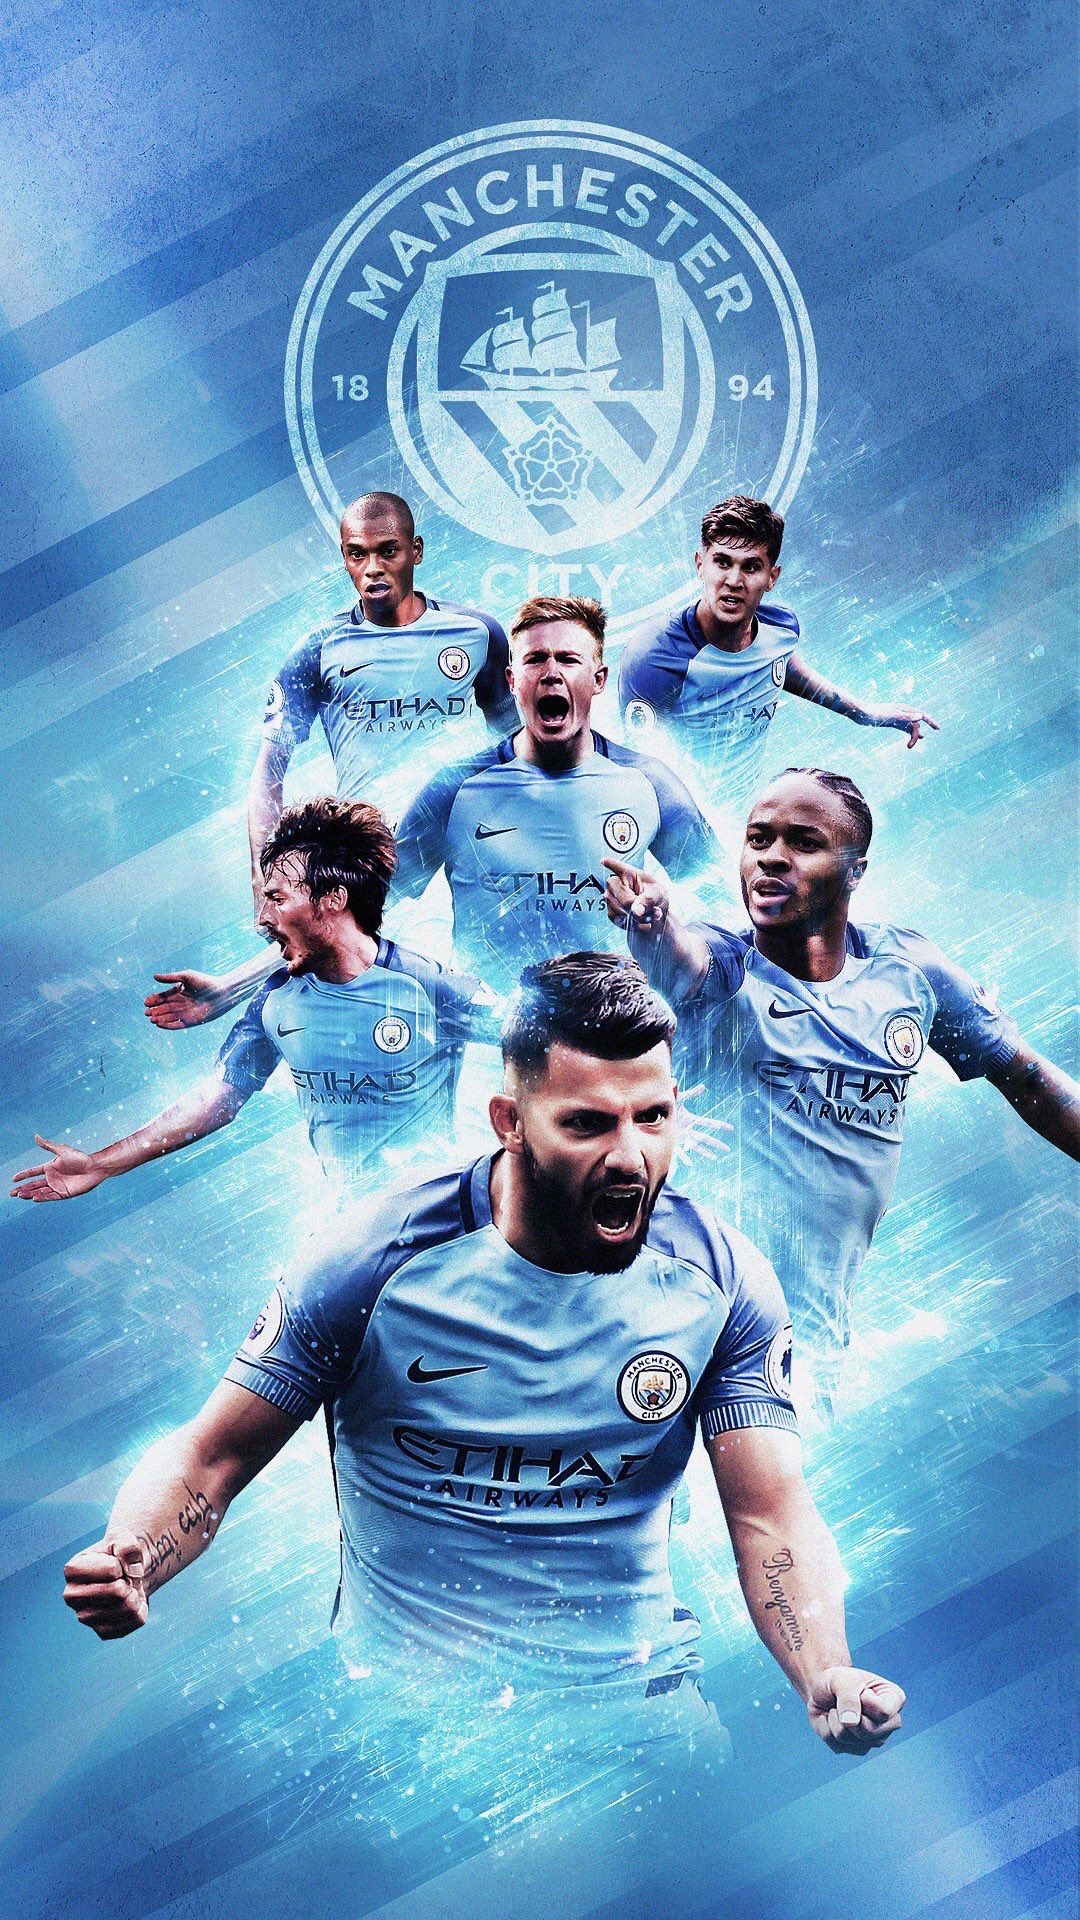 Manchester City F.C. Wallpapers